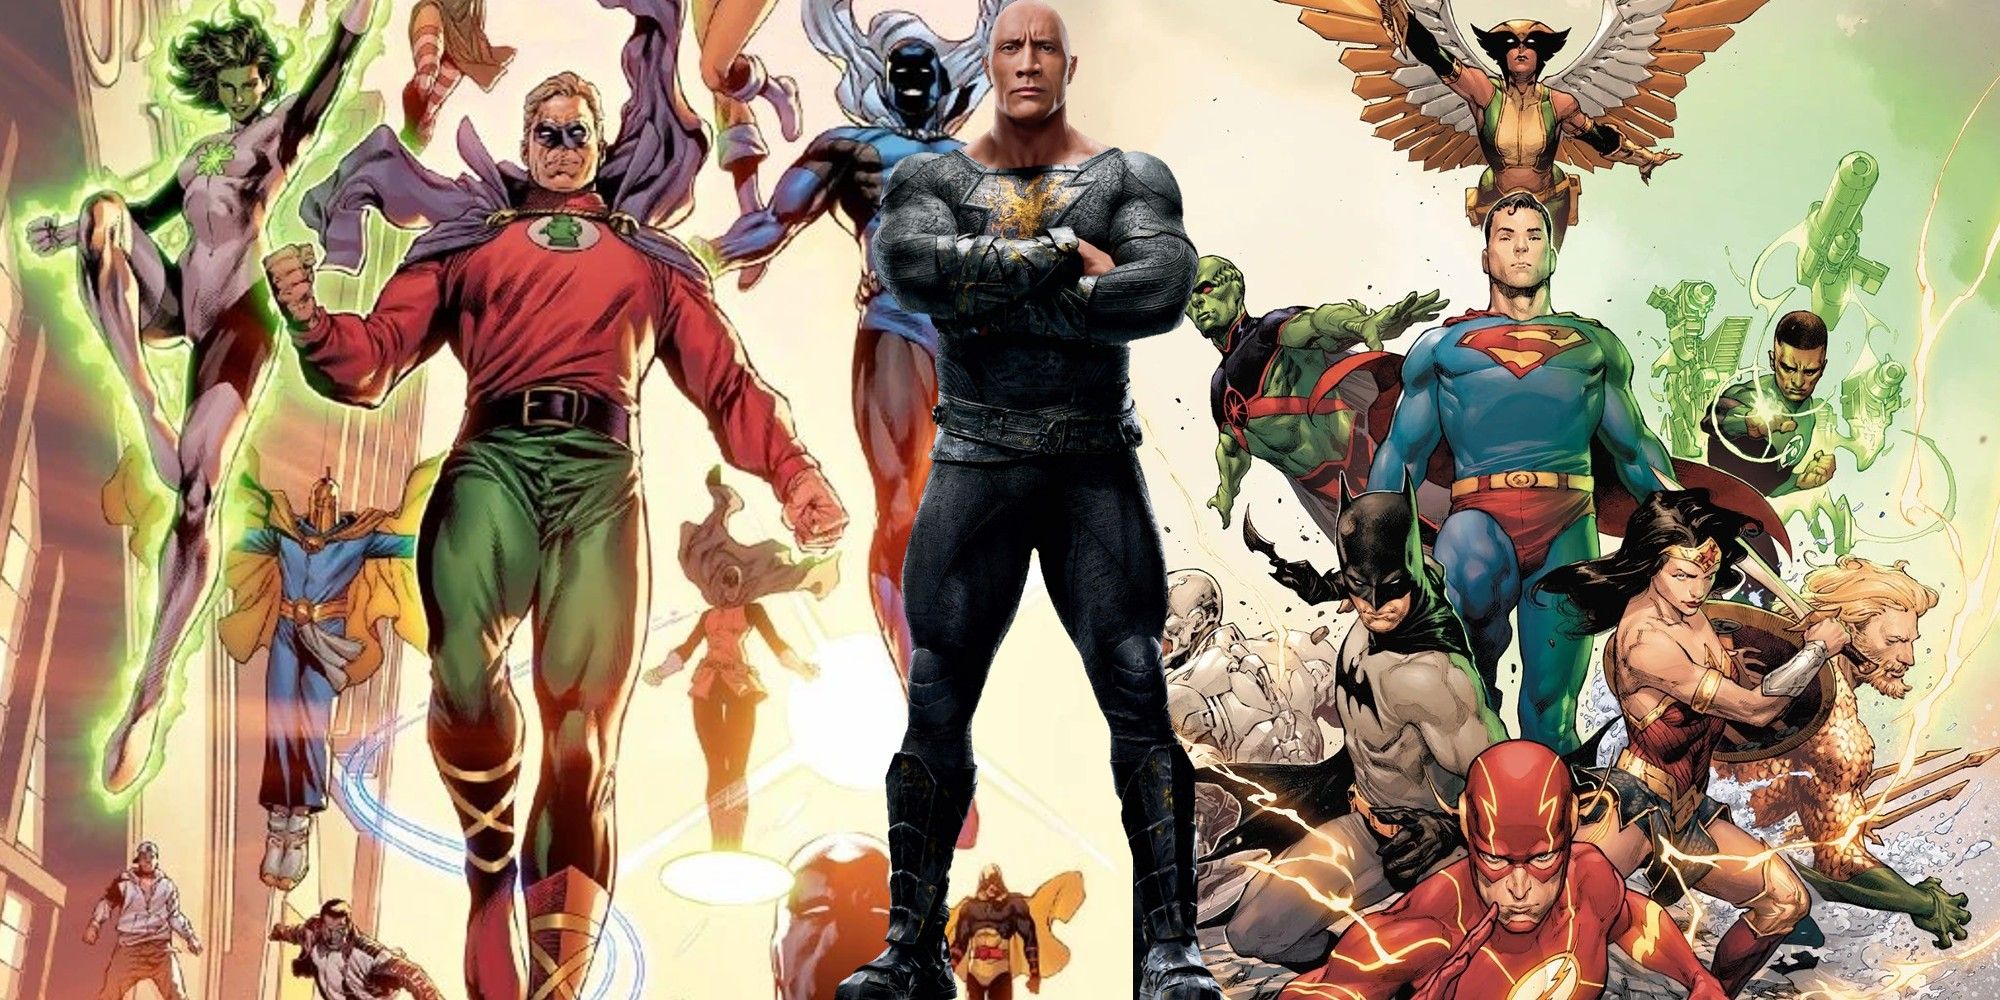 Dwayne Johnson as Black Adam with the Justice Society and Justice League in the background